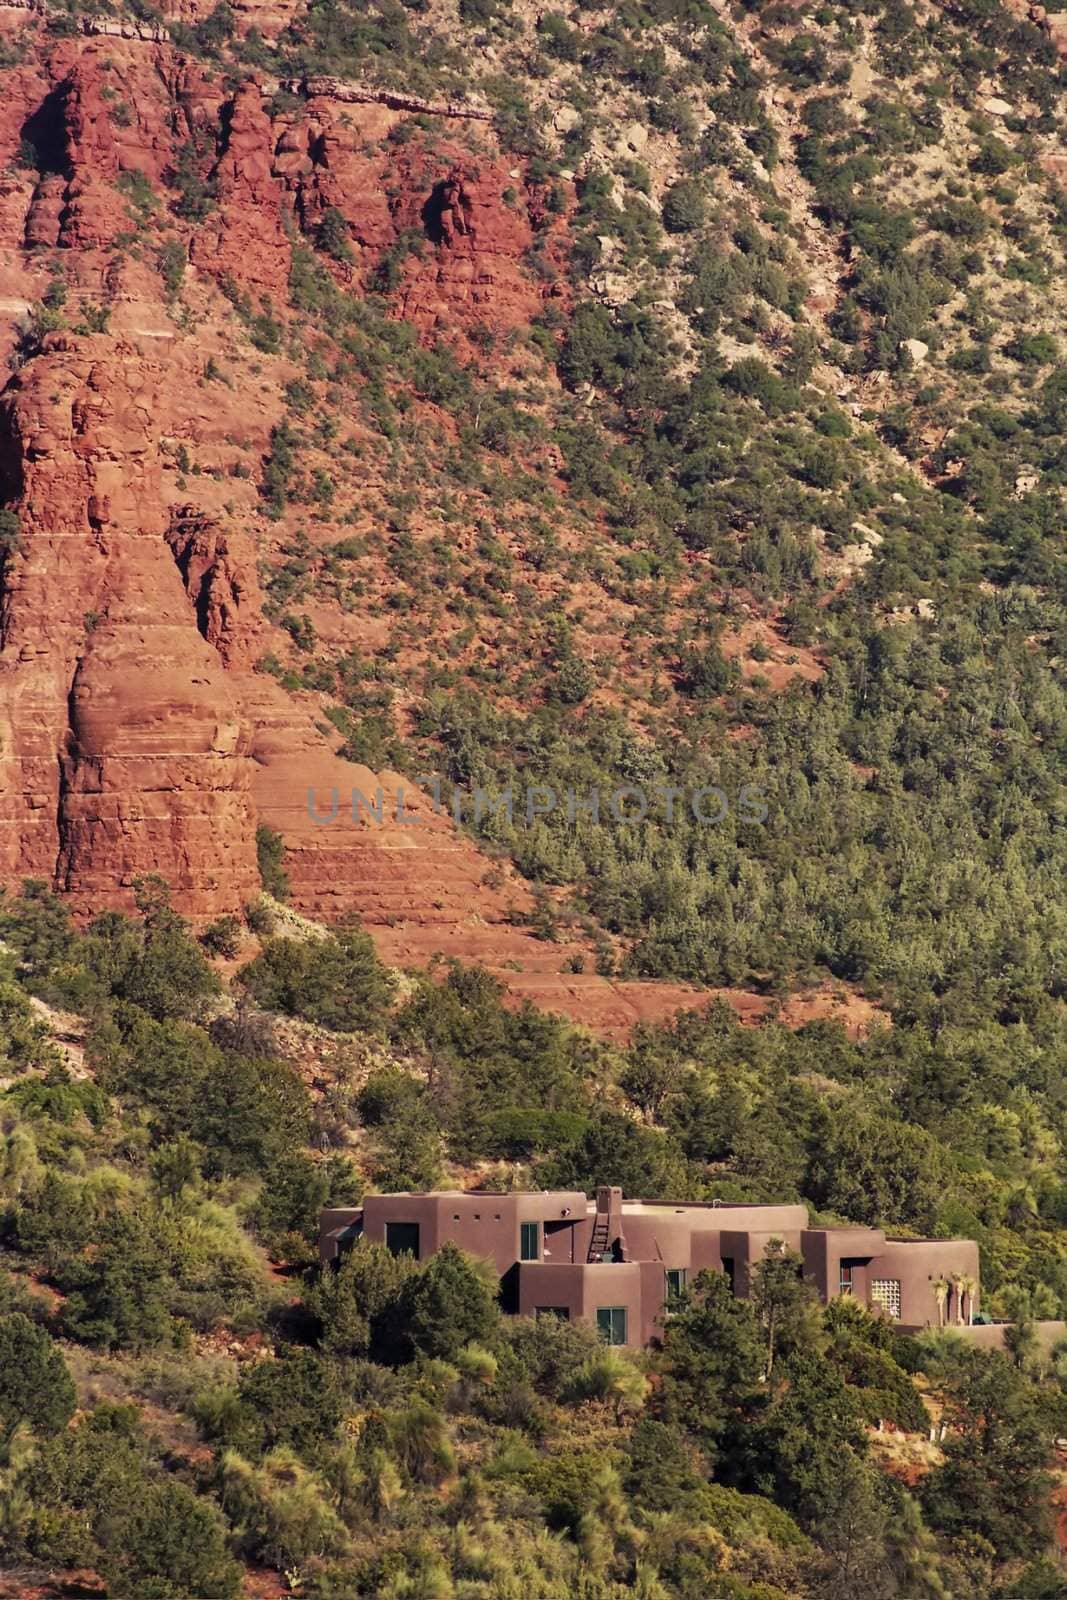 Arizona red rock canyon with buildings nestled in trees by timscottrom